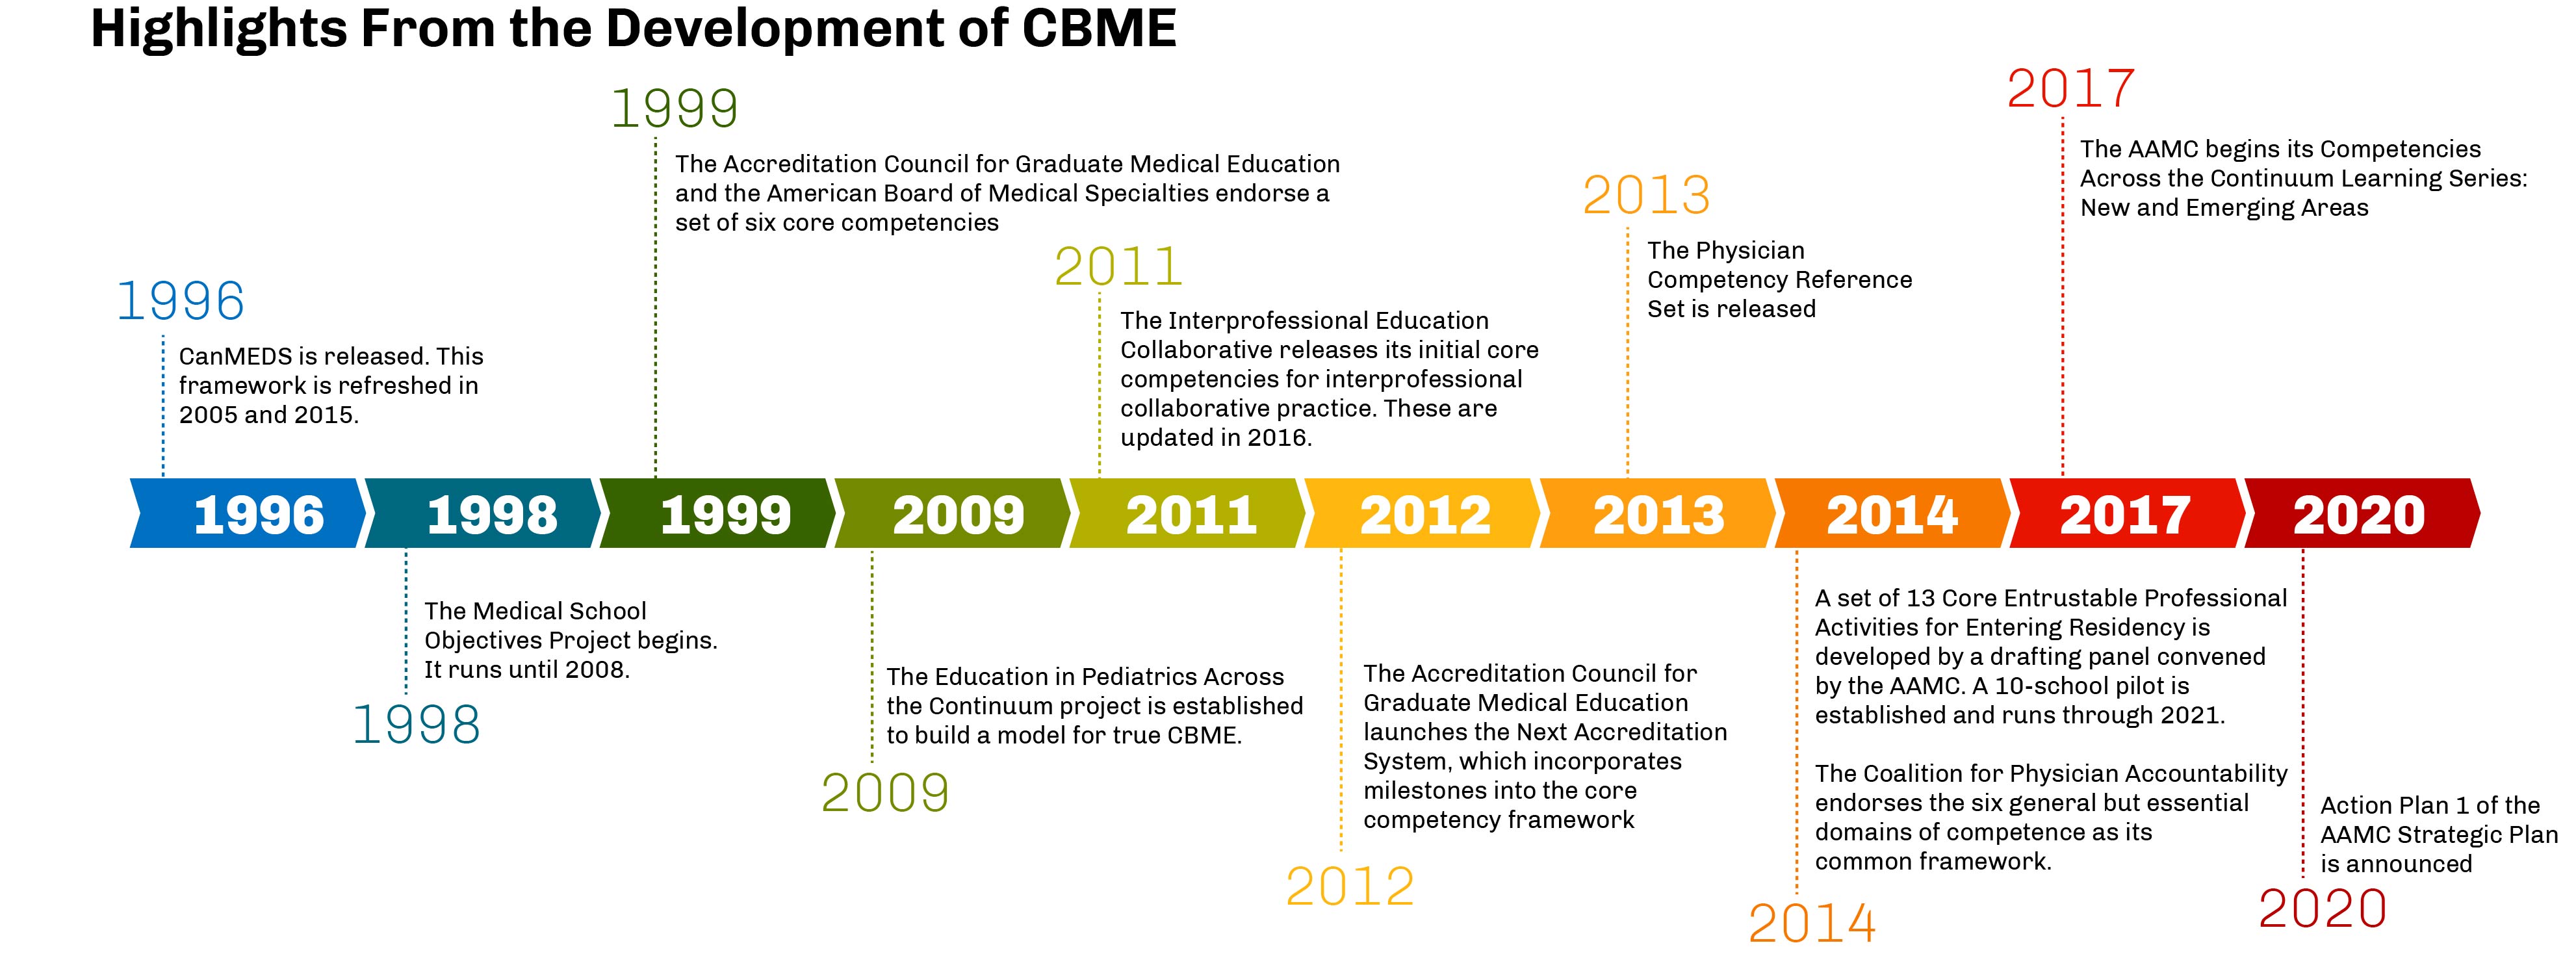 Highlights From the Development of CBME